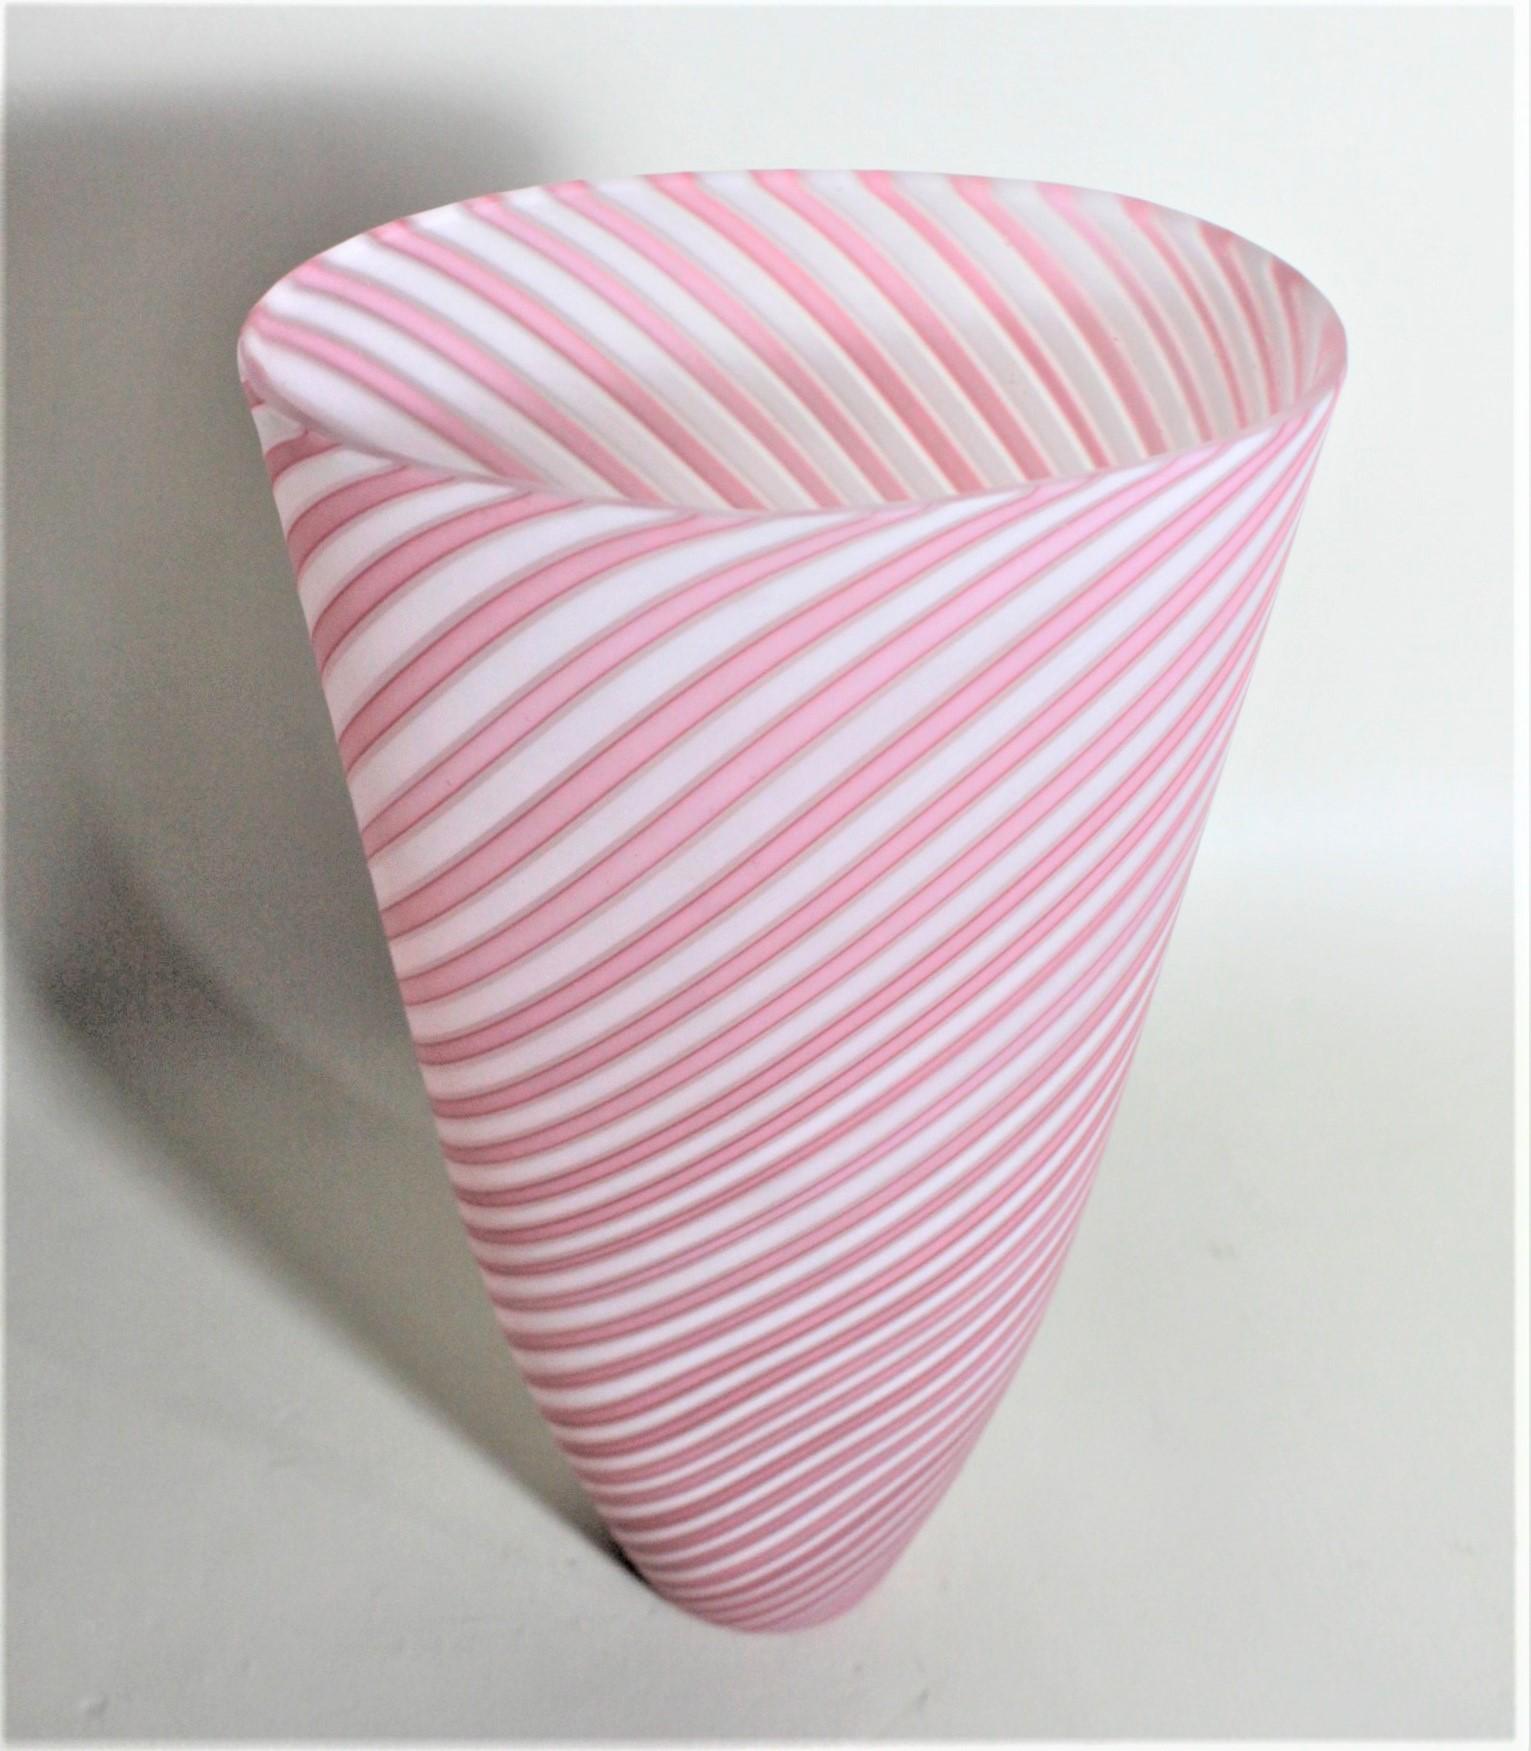 20th Century Mid-Century Modern Murano Cranberry or Pink and White Striped Art Glass Vase